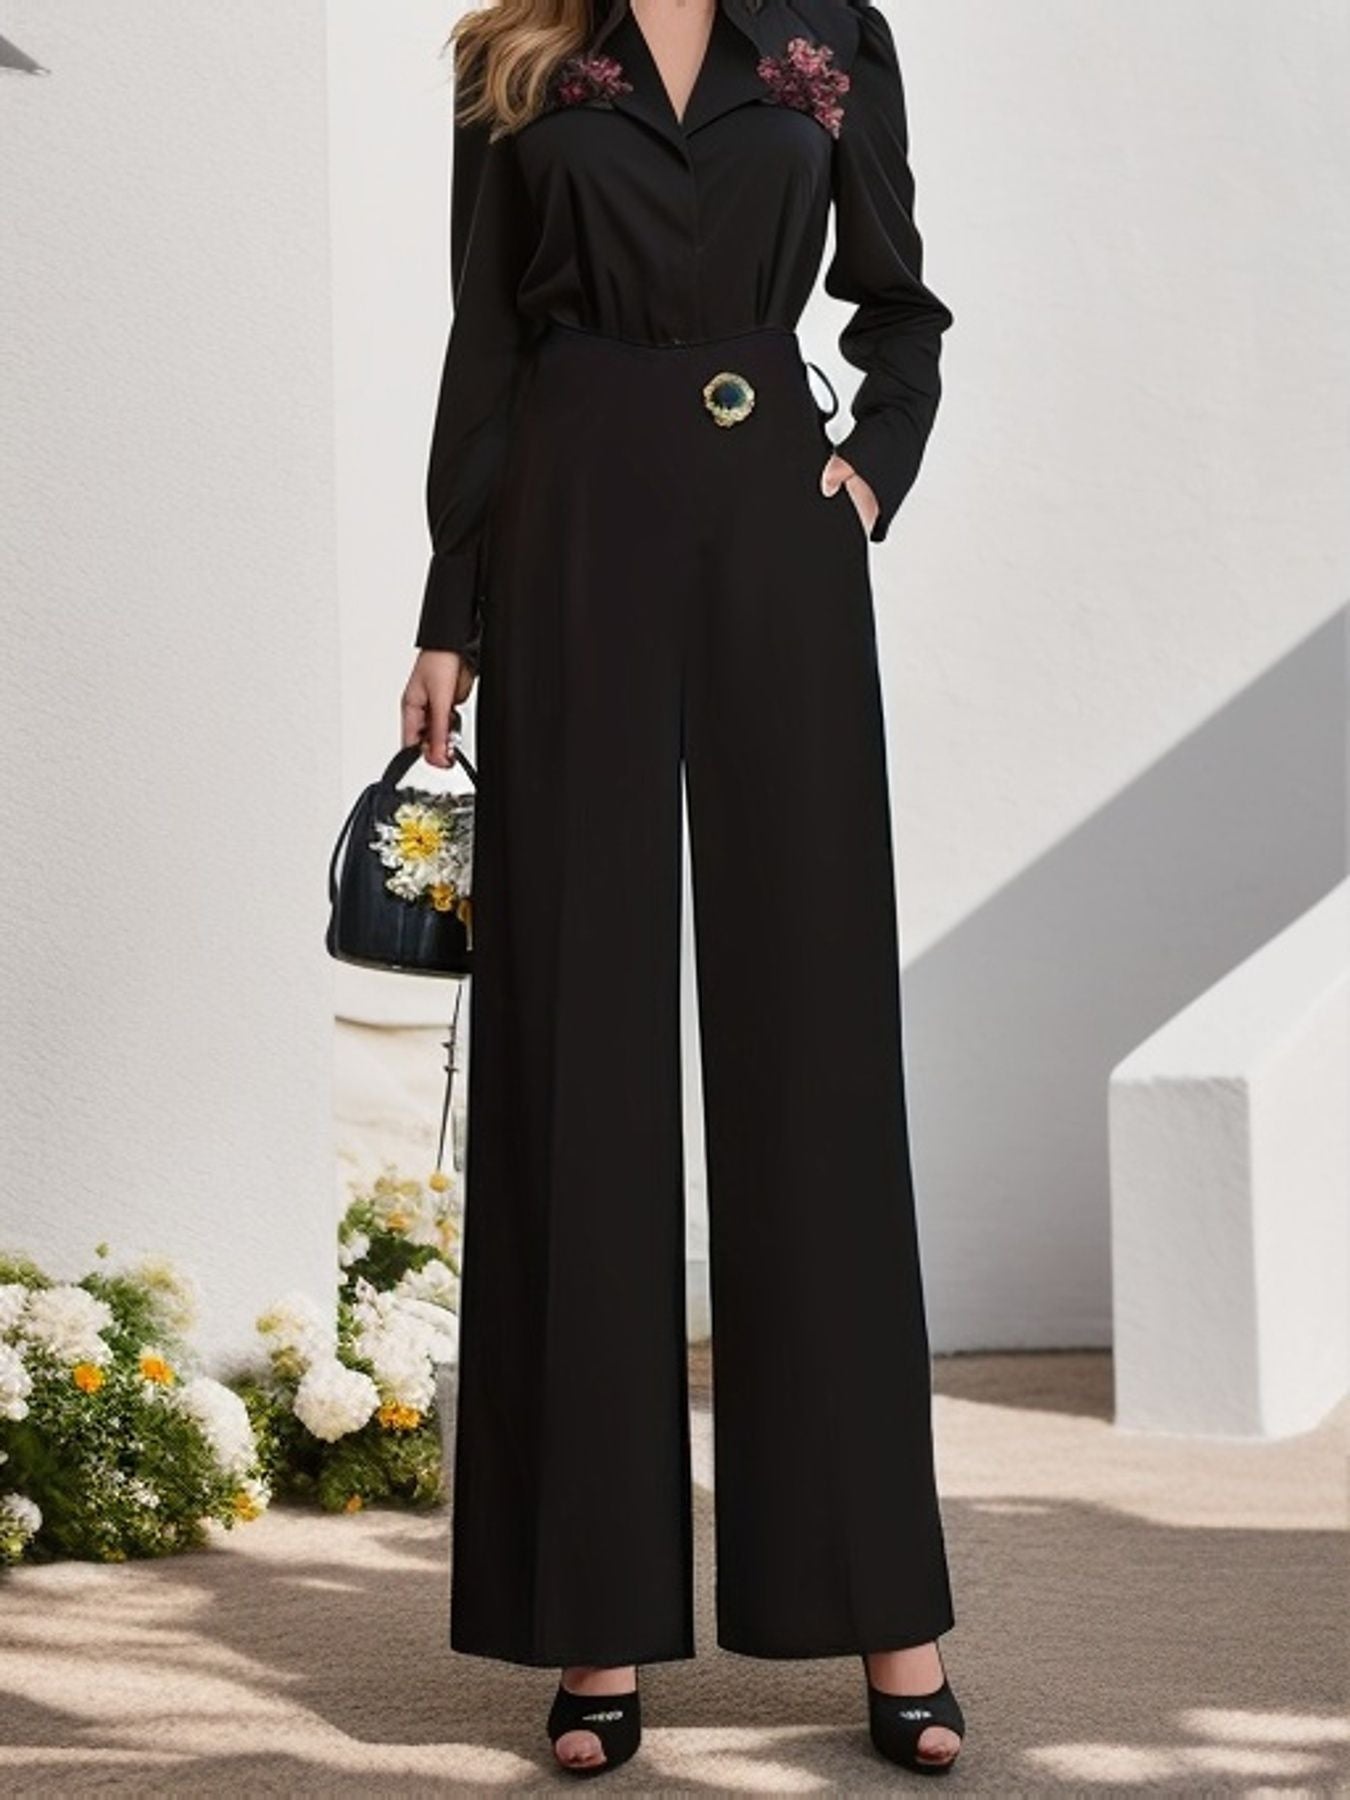 Solid Color High Waist Drooping Casual Wide Leg Pants